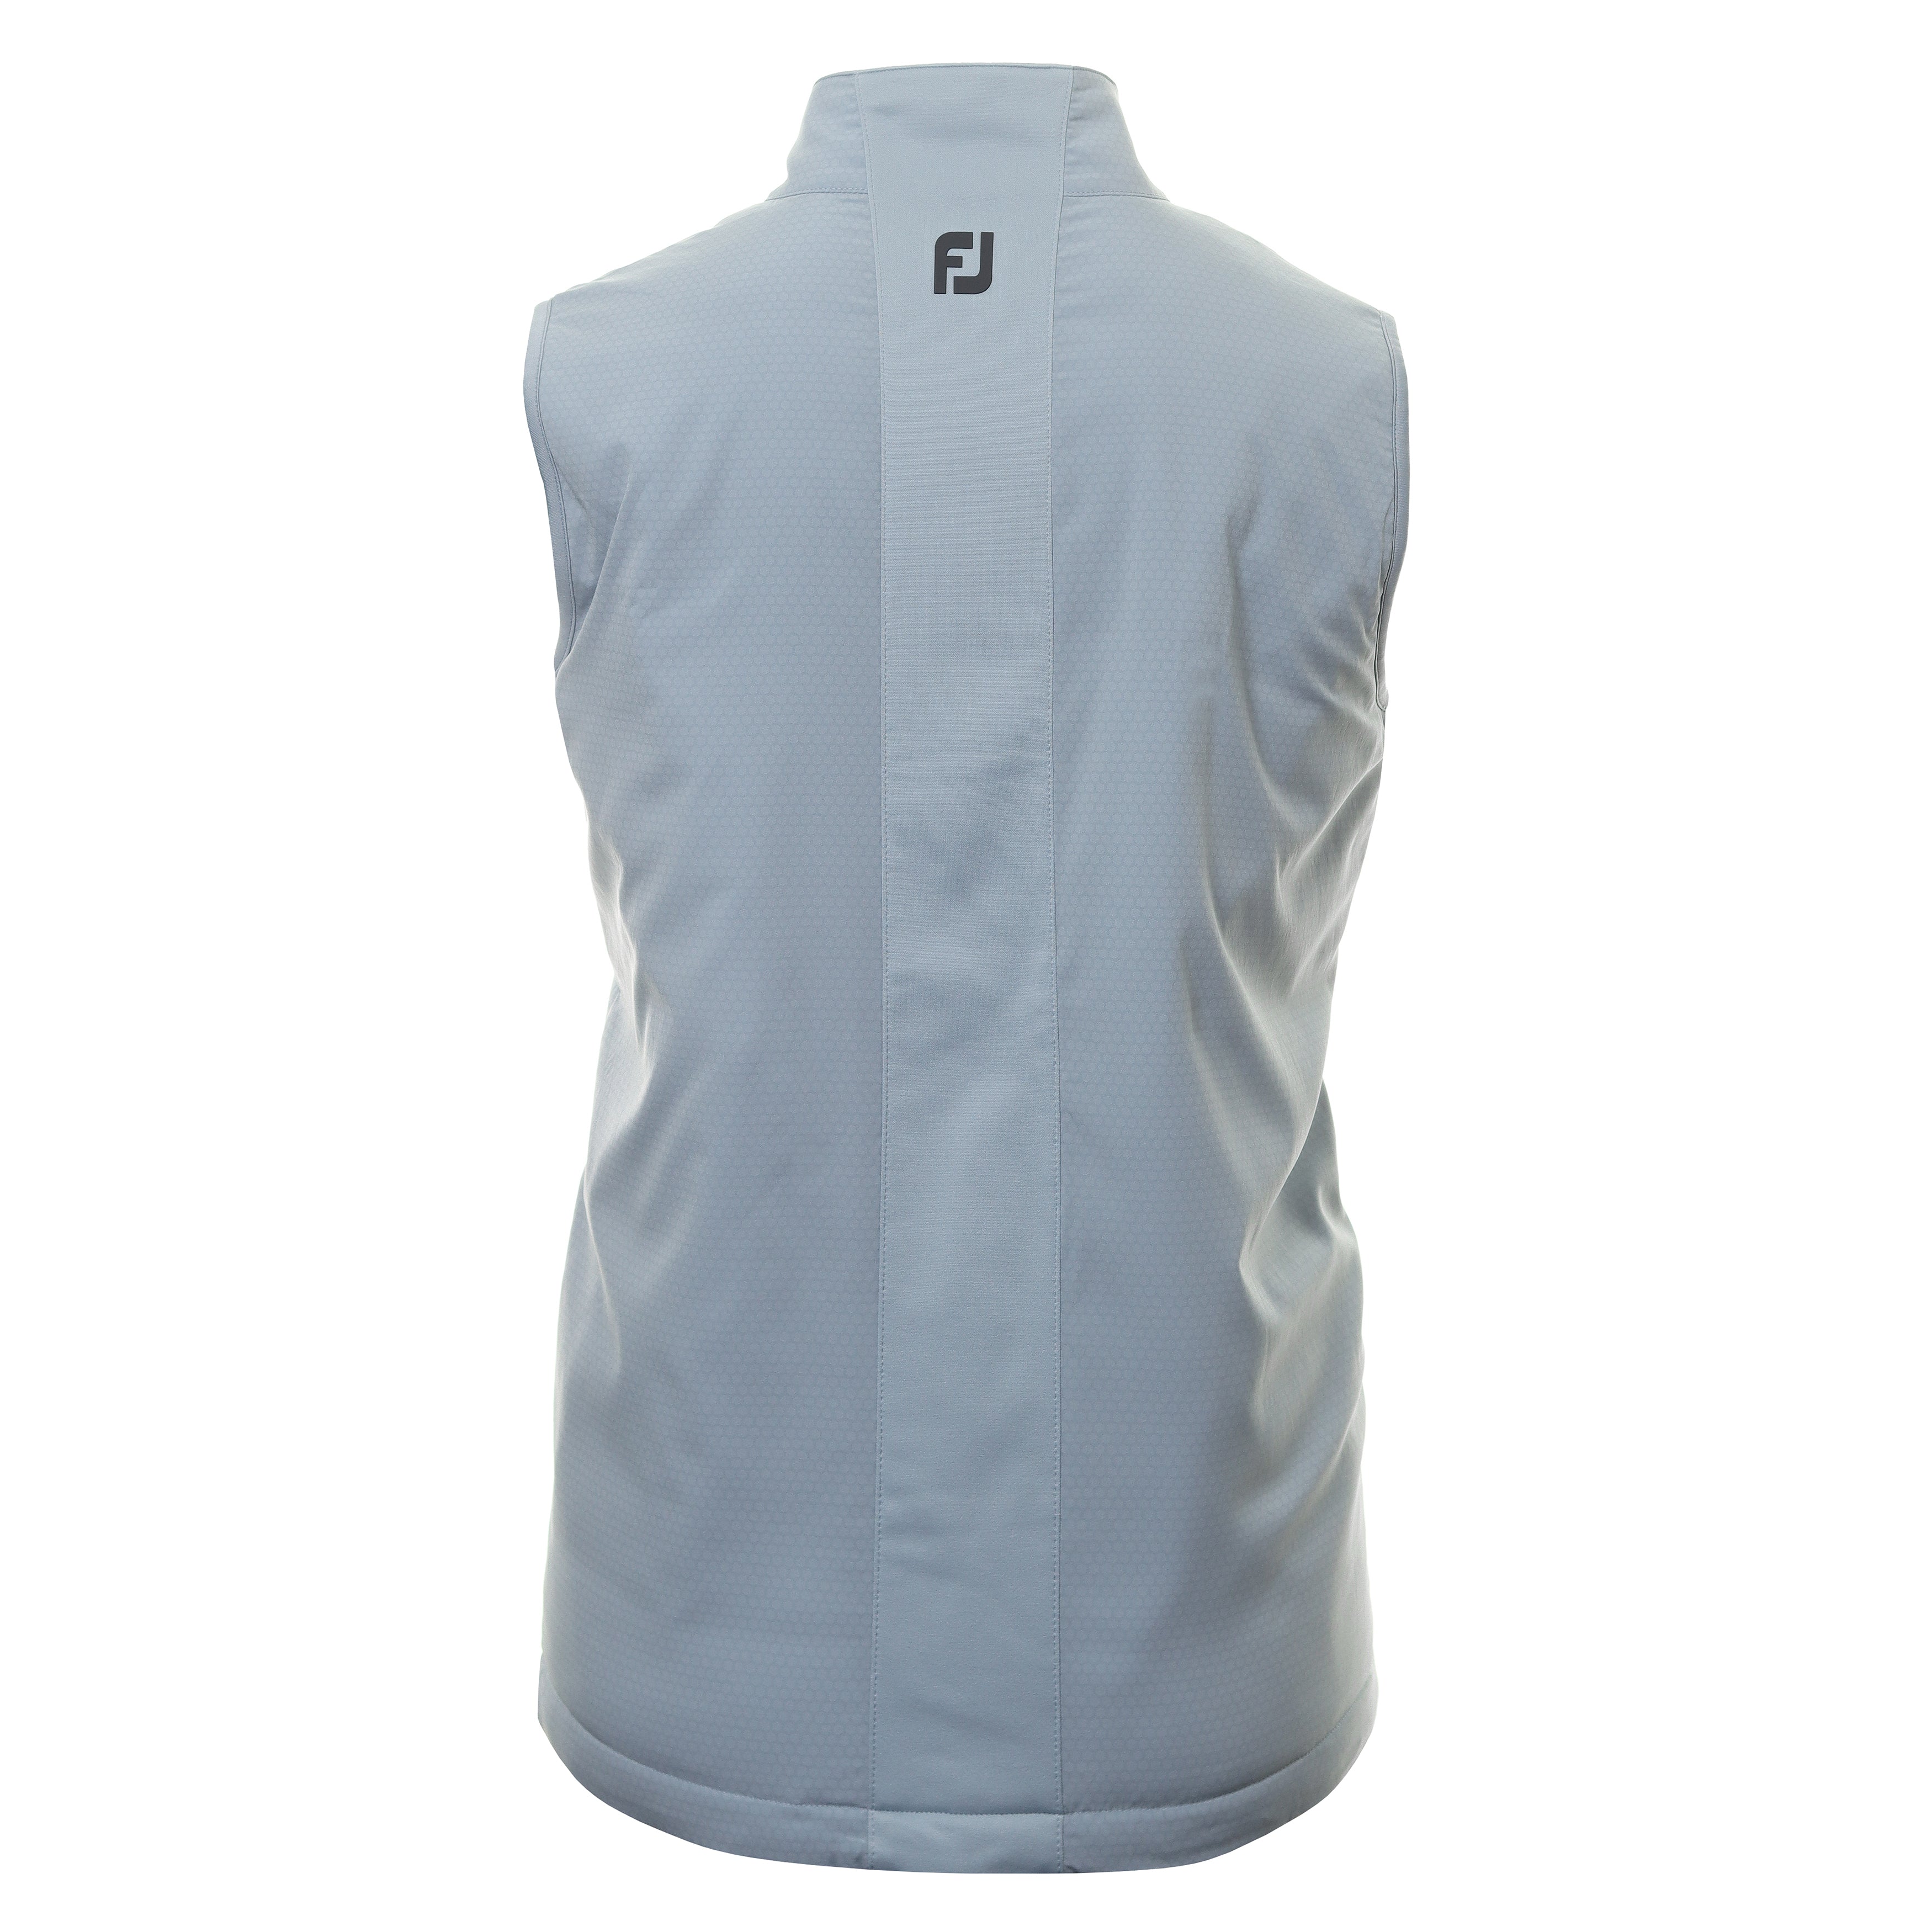 FootJoy ThermoSeries Hybrid Vest 88810 Grey | Function18